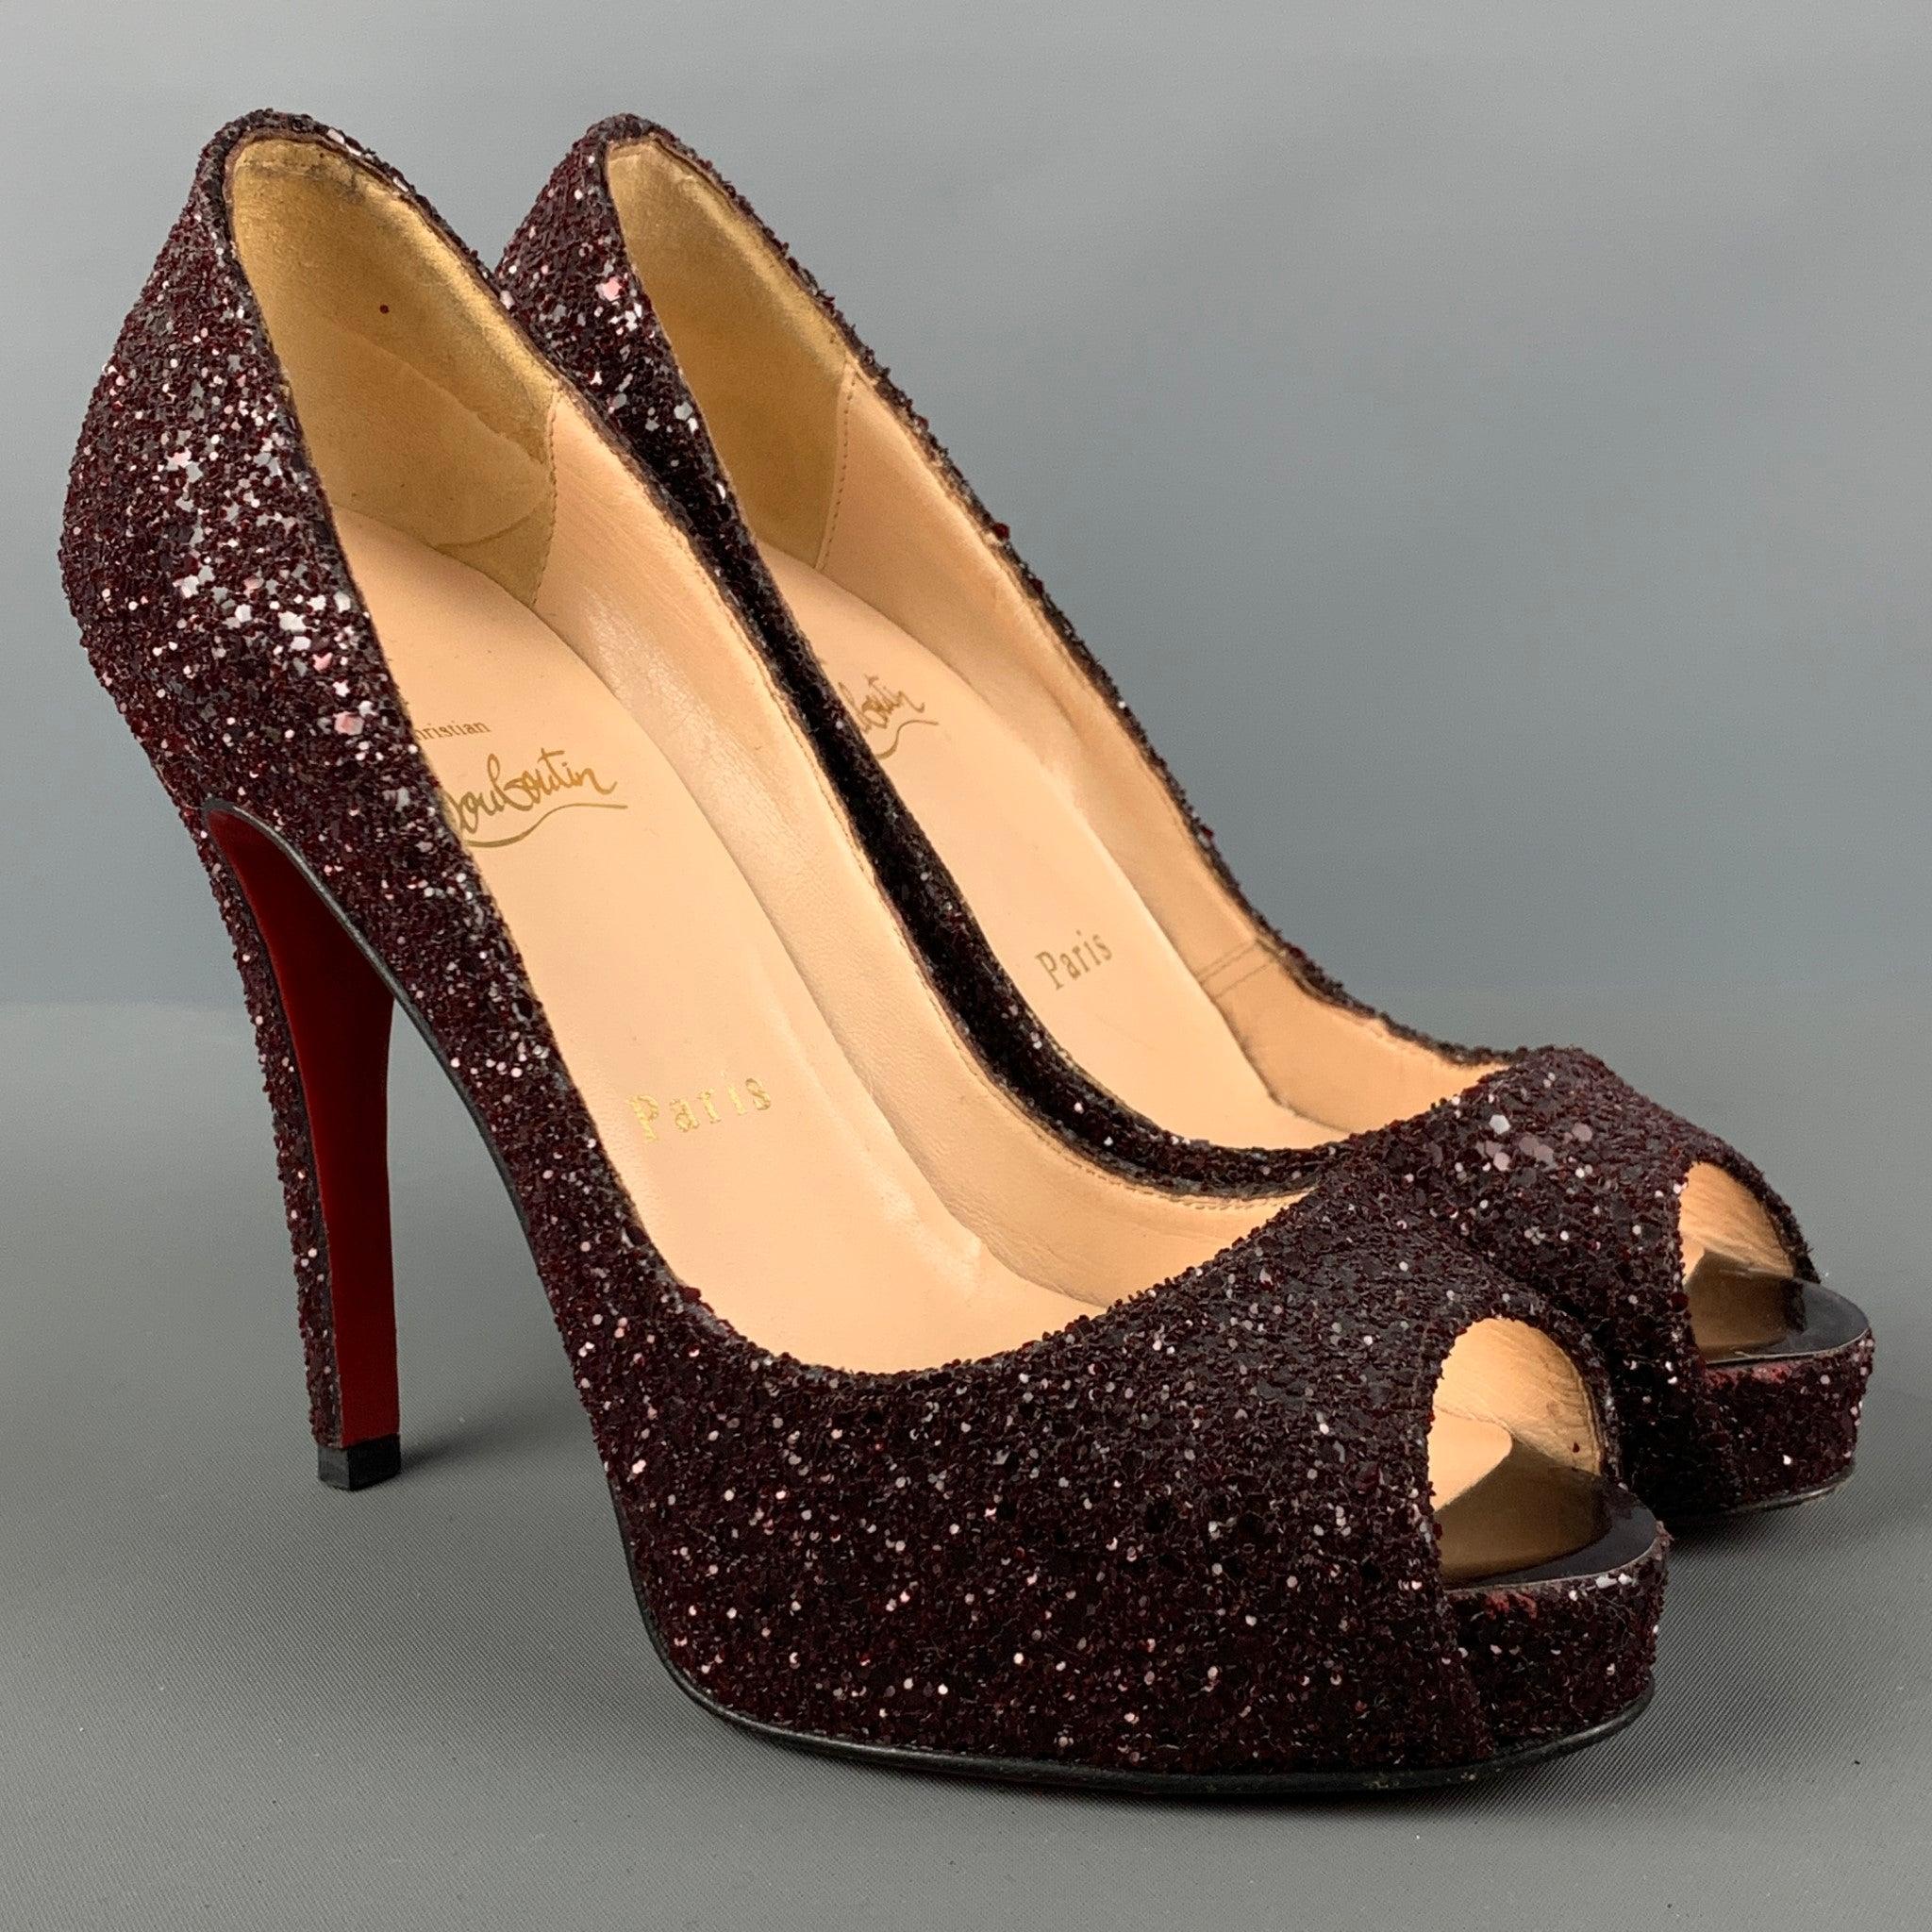 CHRISTIAN LOUBOUTIN pumps comes in a burgundy glitter material featuring an open toe, stone encrusted look, and signature red sol. Made in Italy. Very Good Pre-Owned Condition. 

Marked:   36 1/2 

Measurements: 
  Heel: 4.5 inches Platform: 0.75